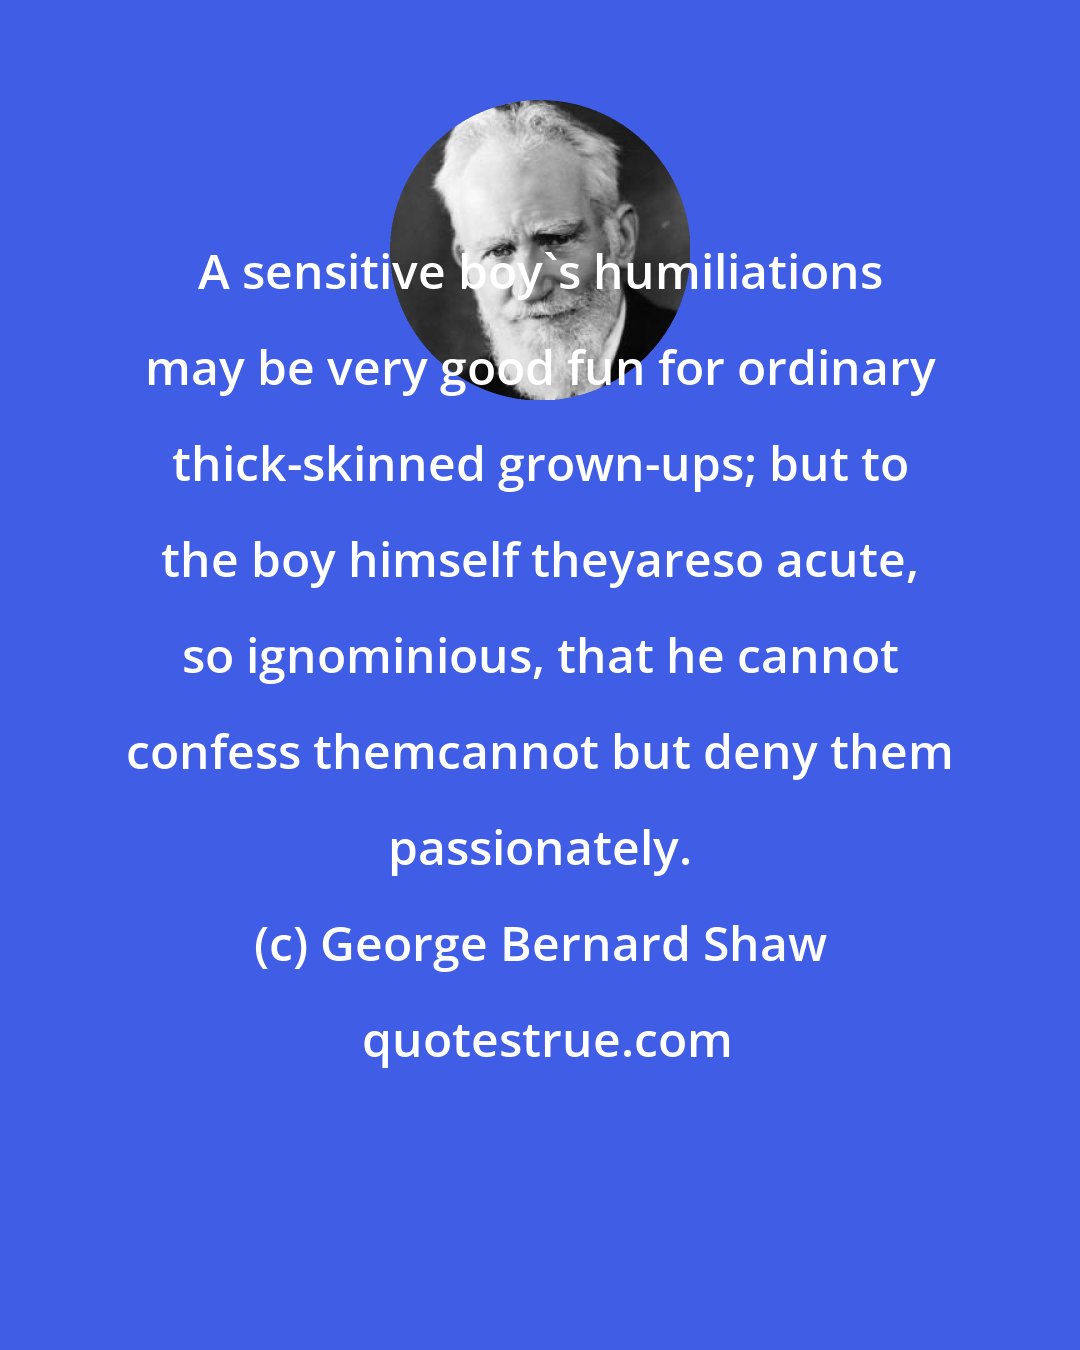 George Bernard Shaw: A sensitive boy's humiliations may be very good fun for ordinary thick-skinned grown-ups; but to the boy himself theyareso acute, so ignominious, that he cannot confess themcannot but deny them passionately.